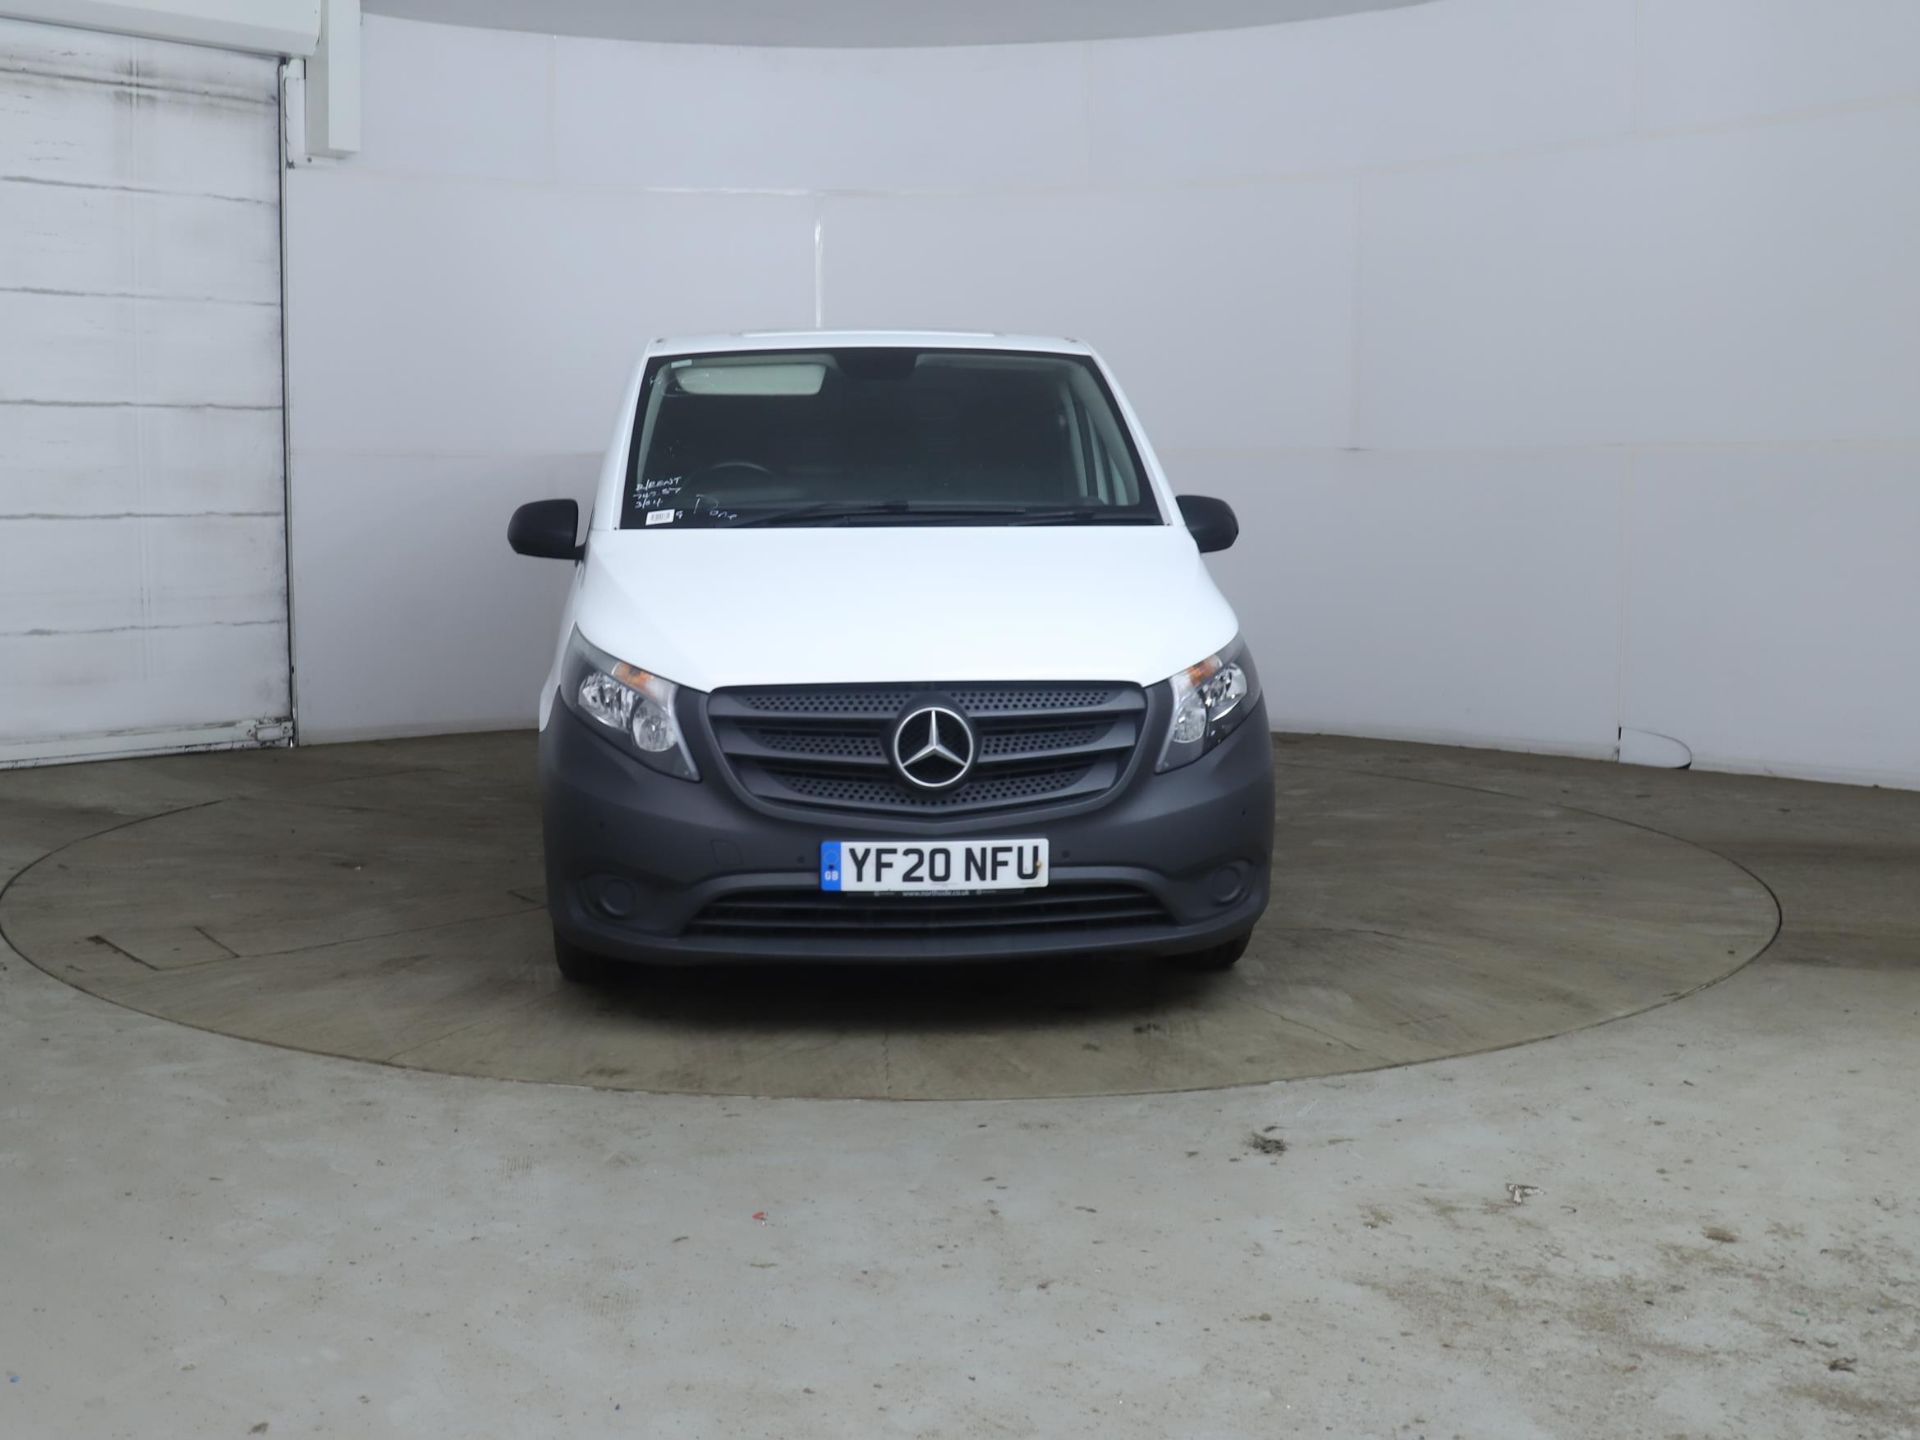 MERCEDES BENZ VITO CDI PURE - 2020 20 Reg - Only 74k Miles - 1 Owner From New - Parking Sensors - Image 6 of 12